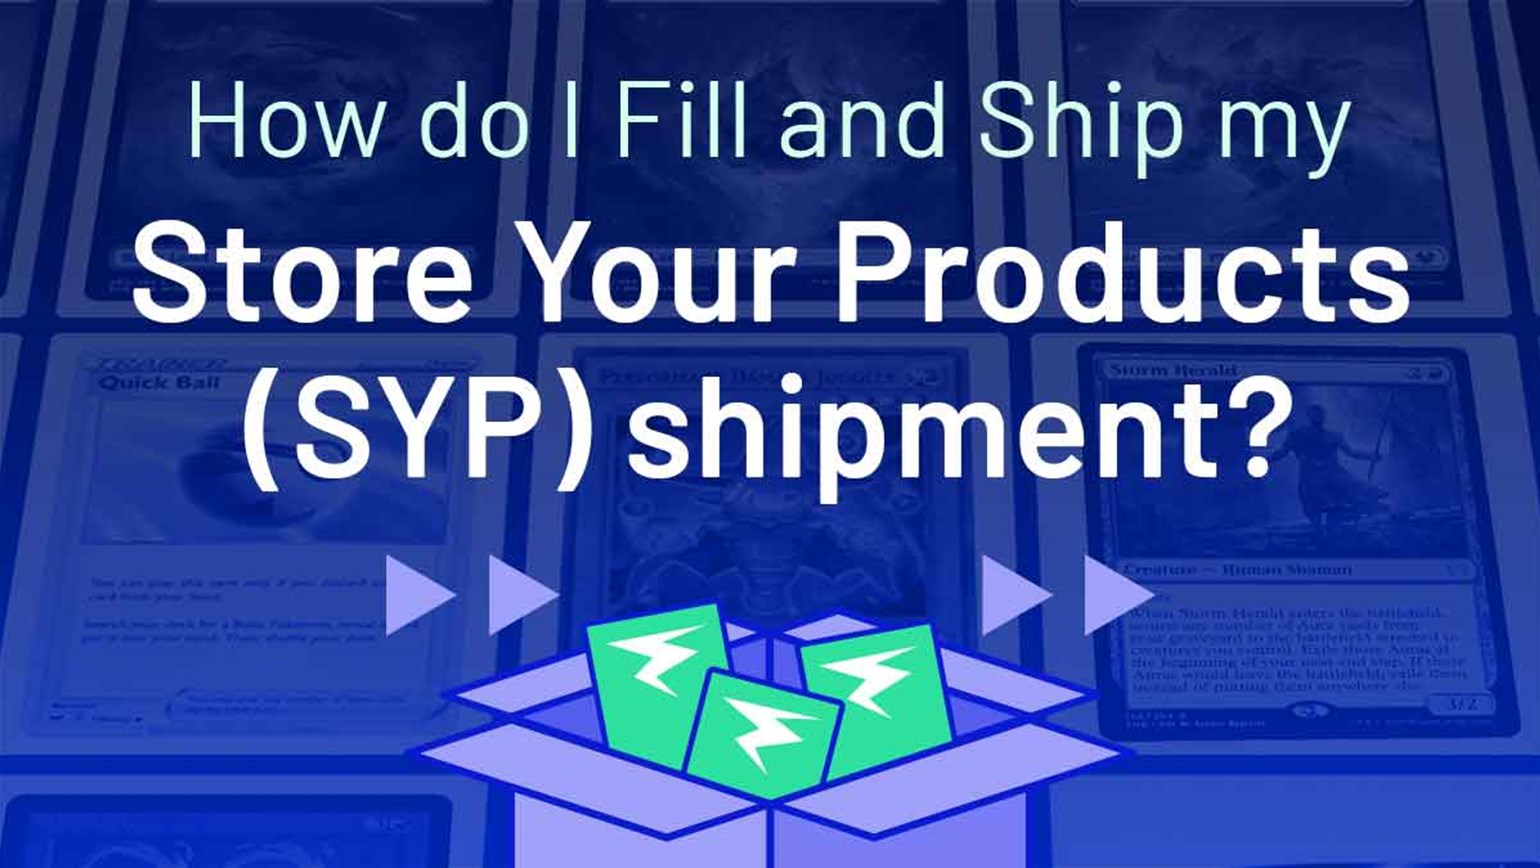 How Do I Fill and Ship My Store Your Products (SYP) Shipment?